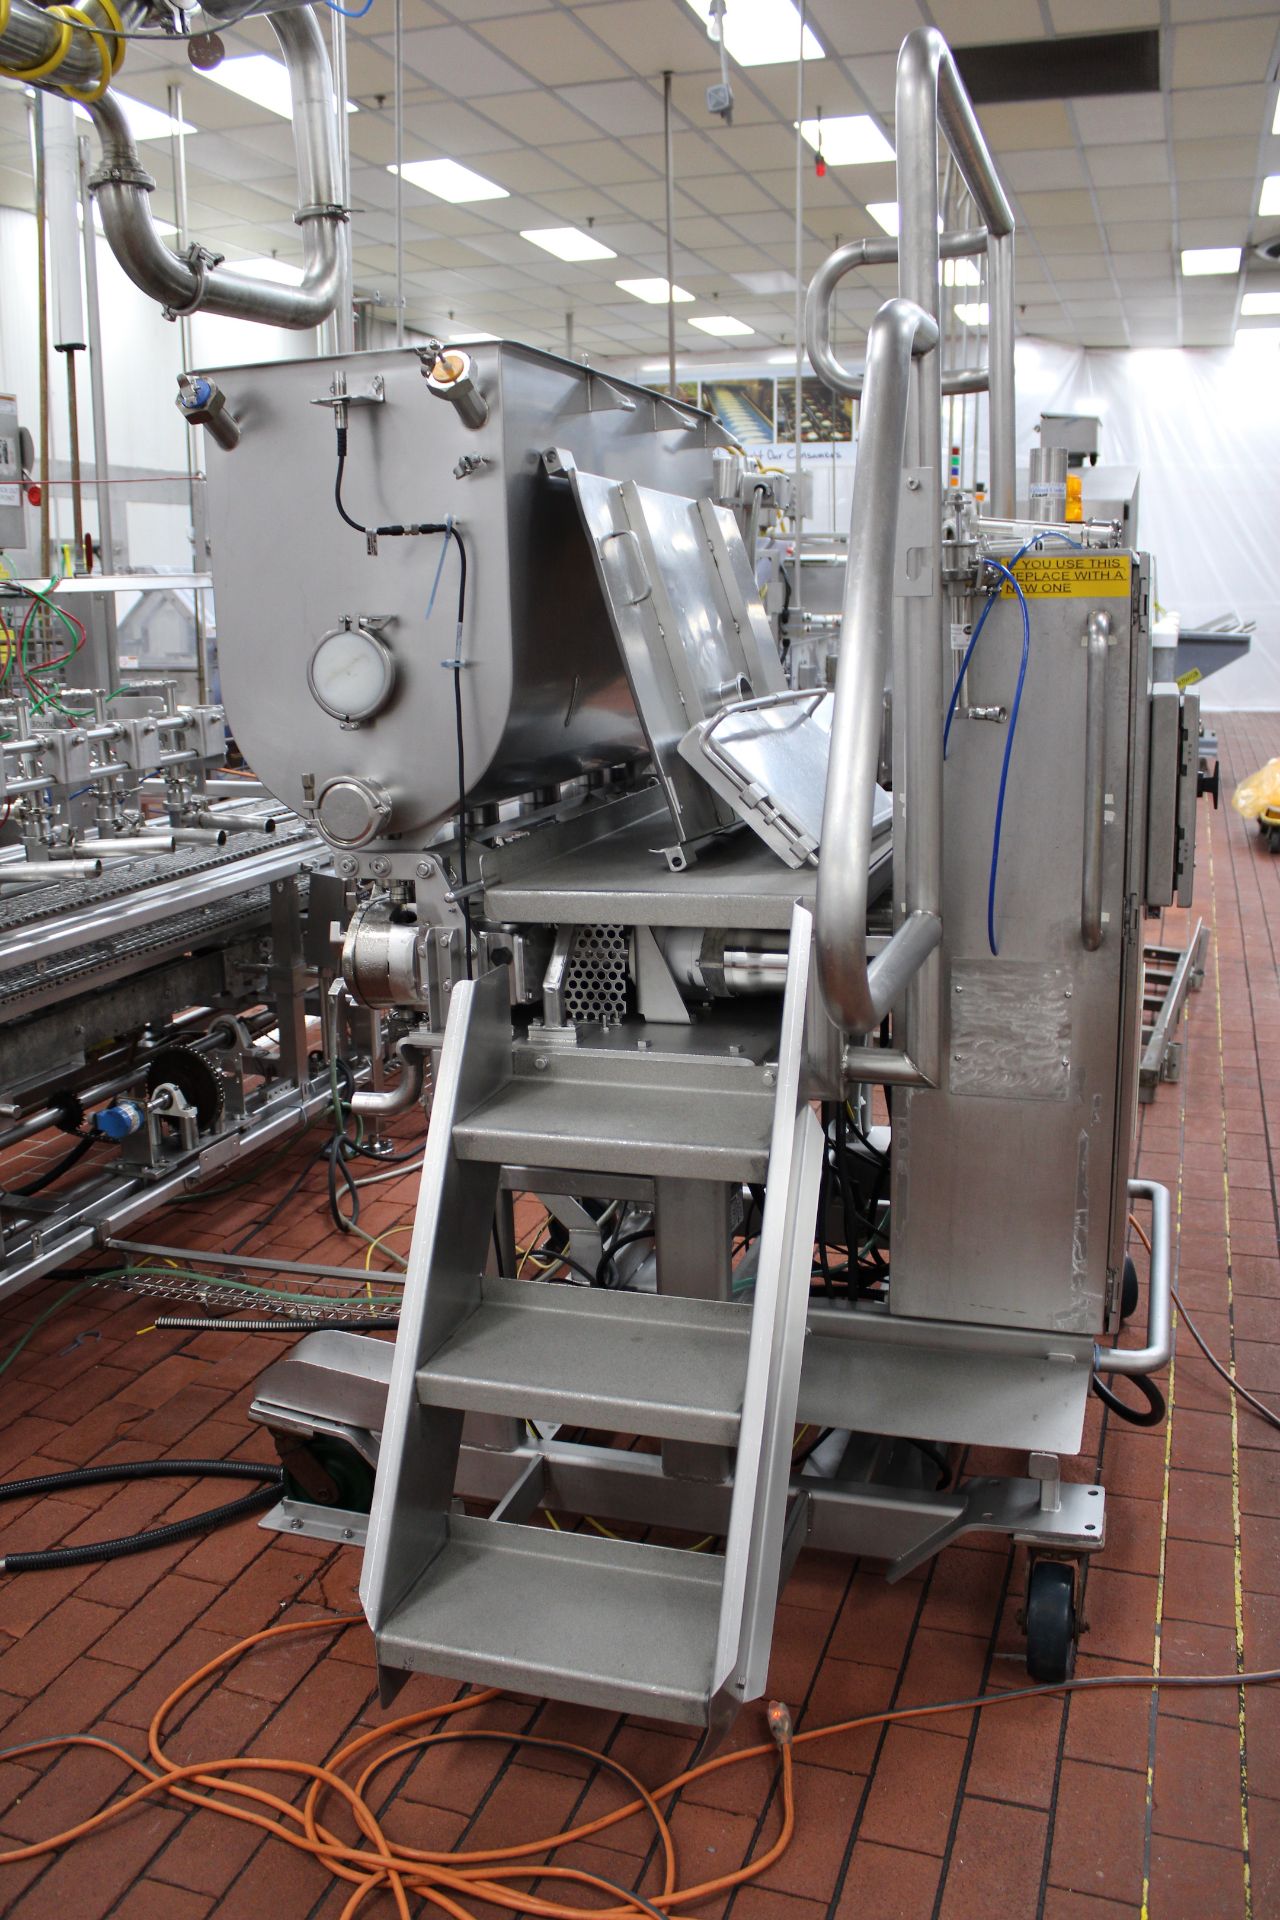 HINDSBOCK 4-WIDE SAUCE APPLICATOR / FILLER, EQUIPPED WITH SERVO DRIVEN AMPCO AND WAUKESHA CHERRY - Image 6 of 11